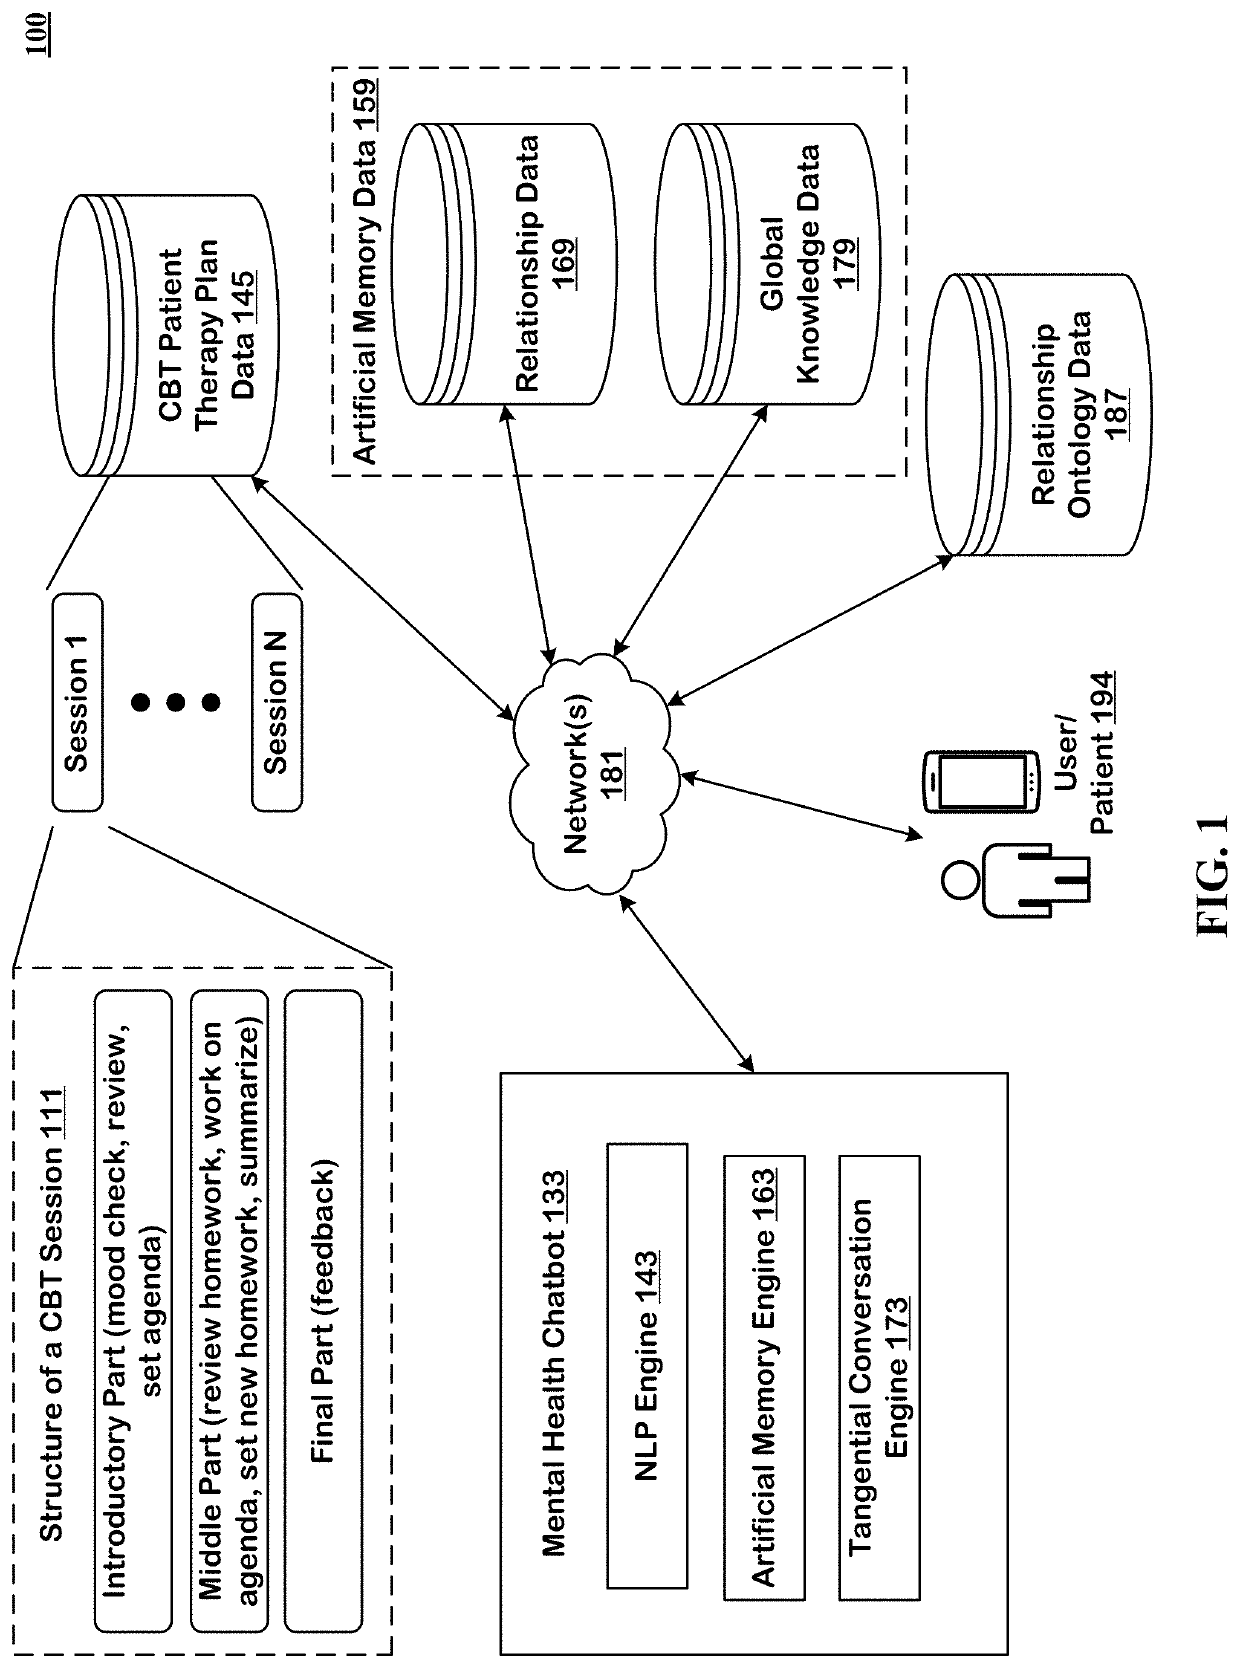 Artificial Memory for use in Cognitive Behavioral Therapy Chatbot